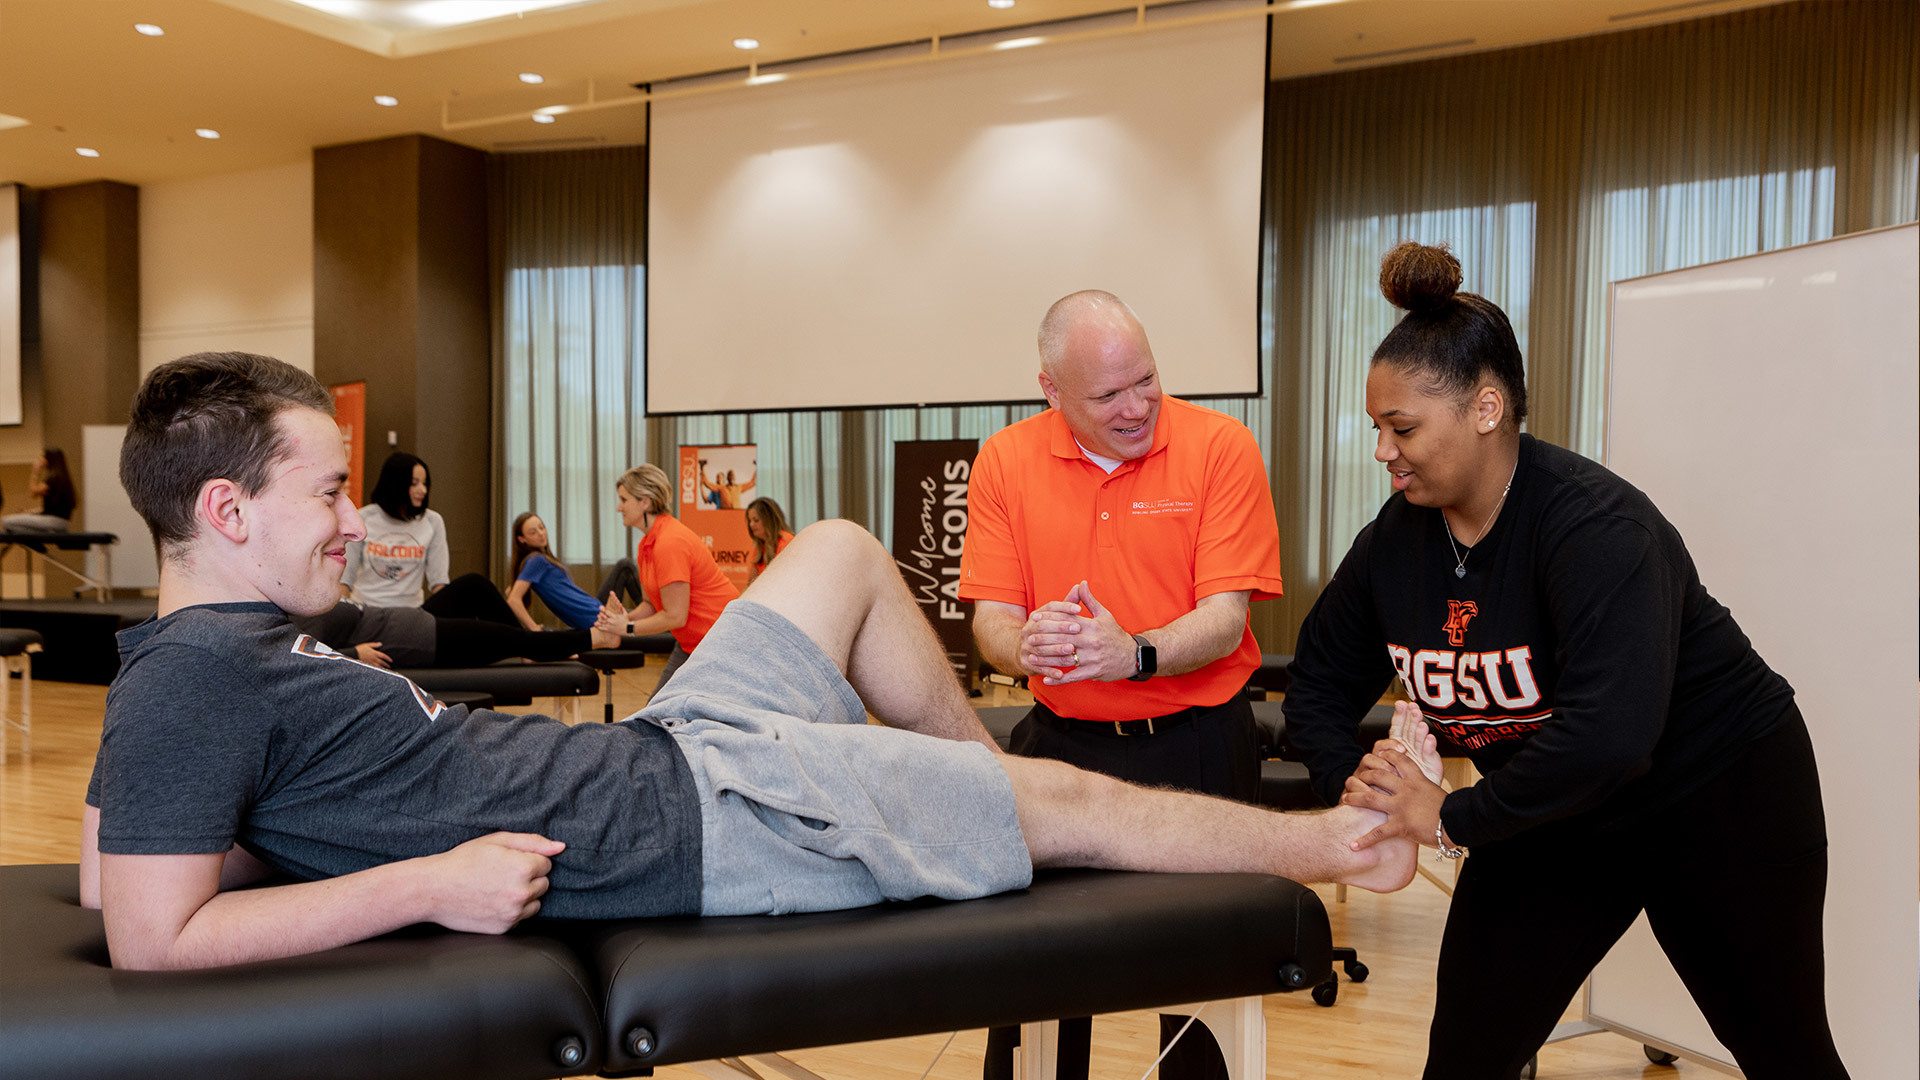 A Physical Therapy student testing foot reflexes